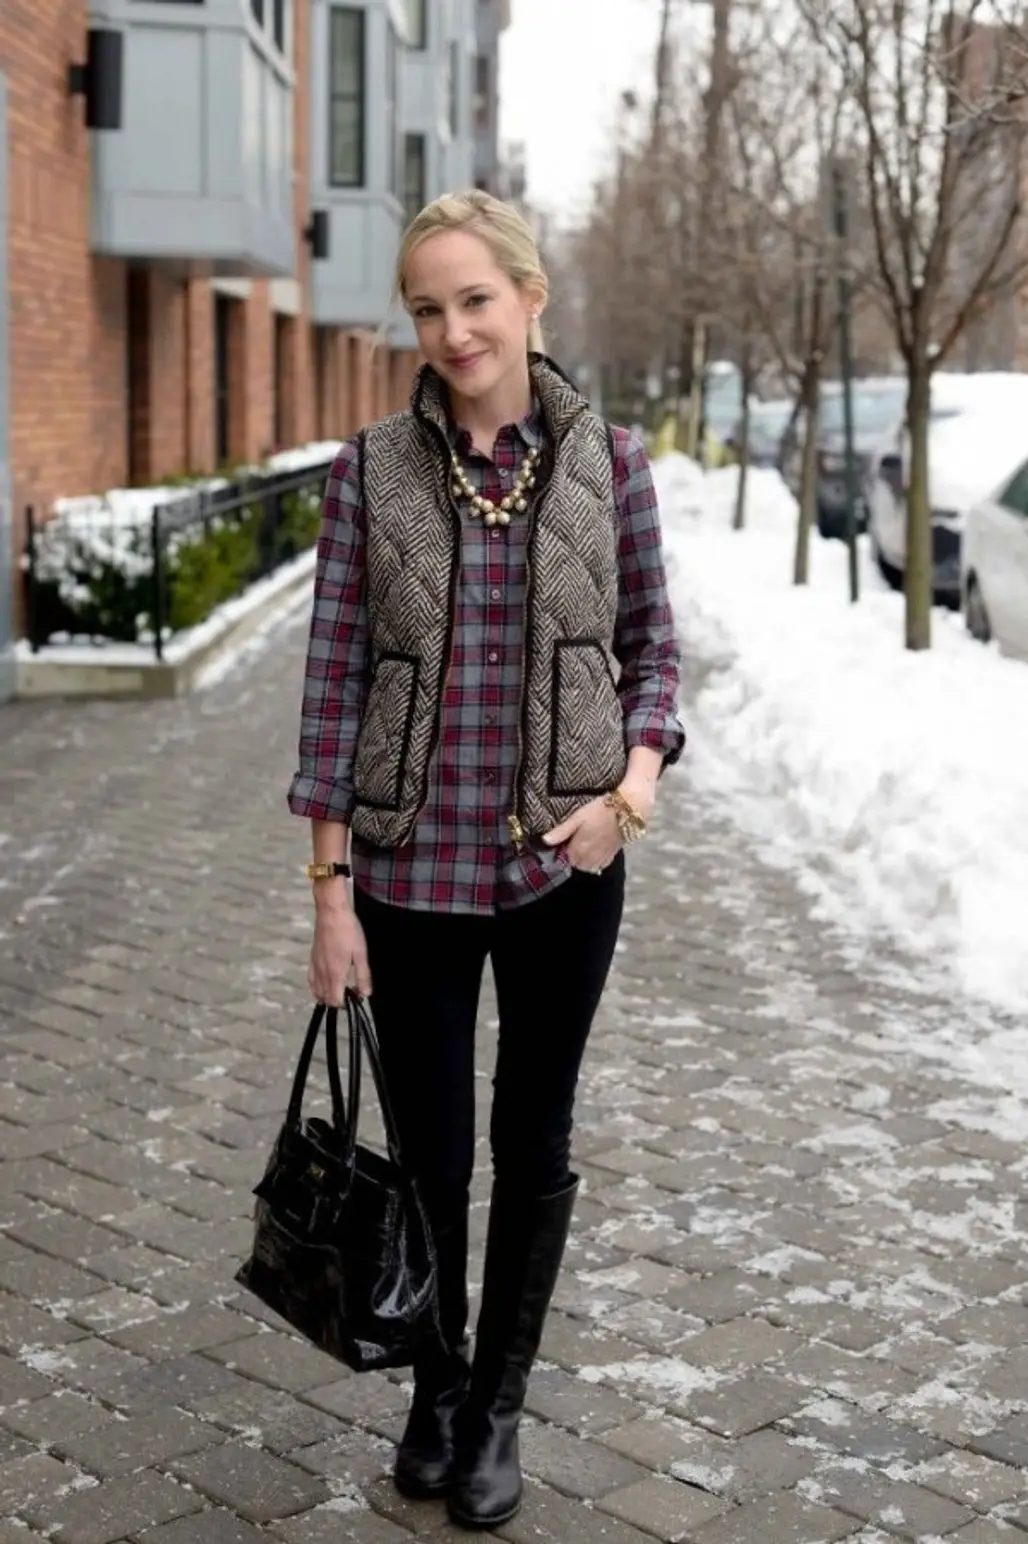 With a Flannel and Vest